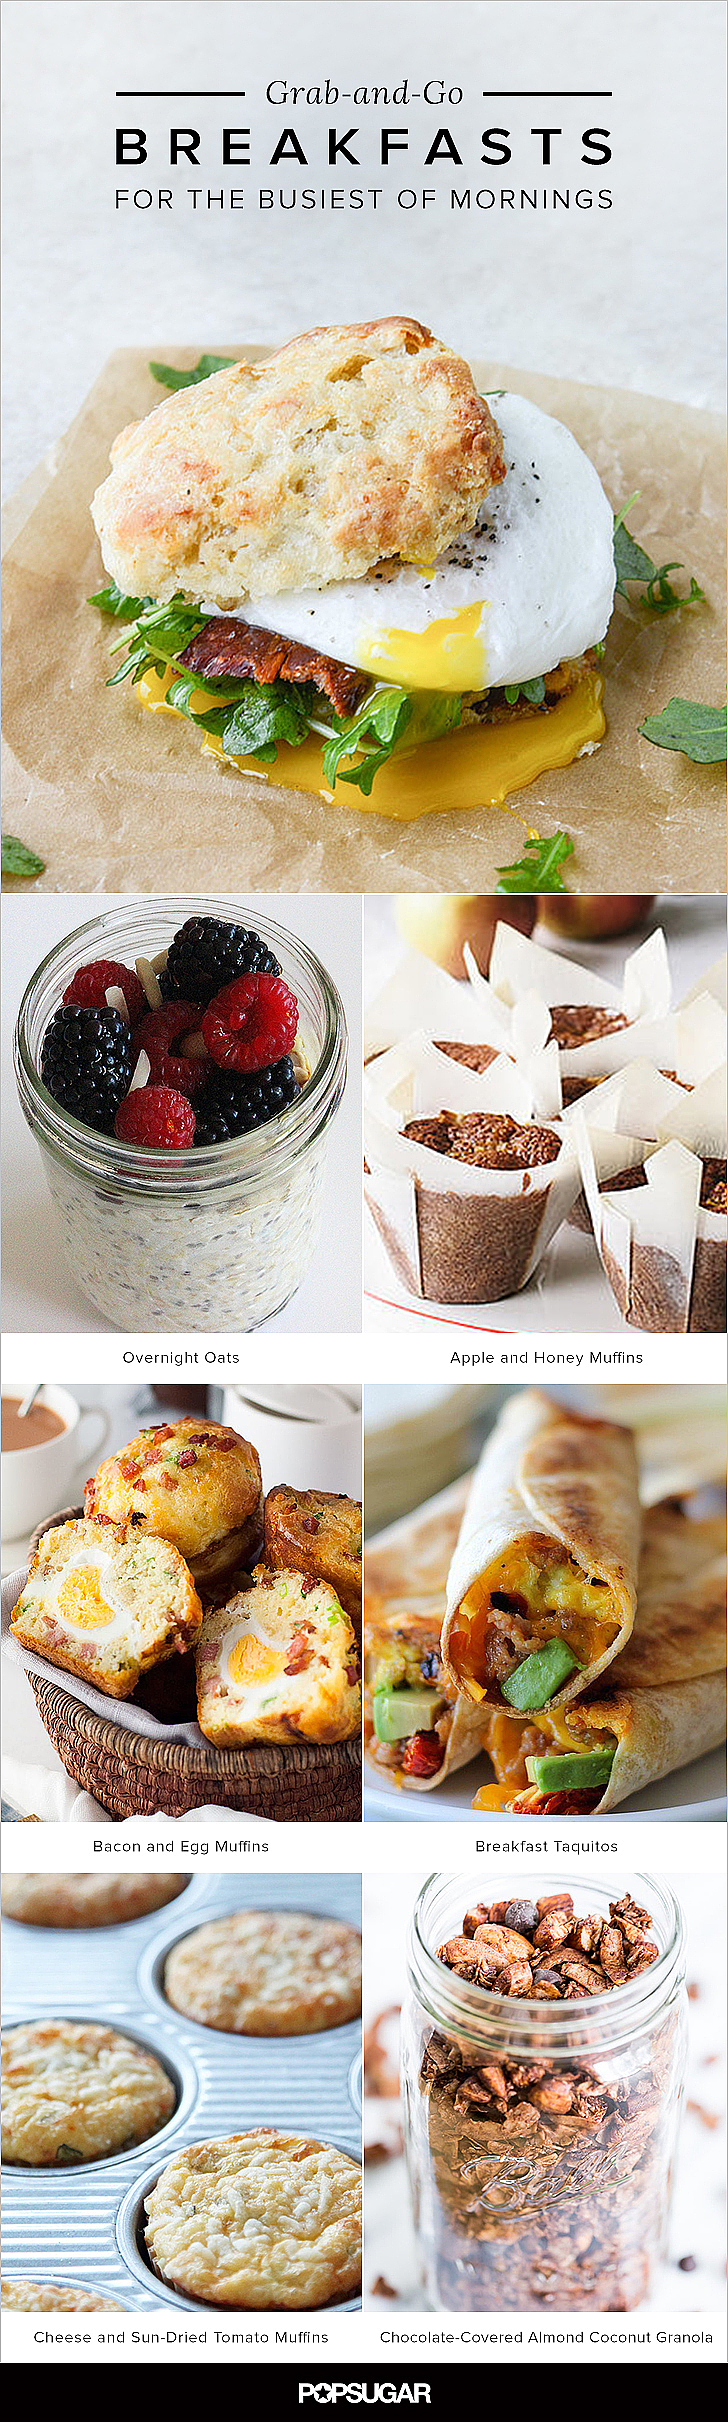 Grab-and-Go Breakfast Recipes